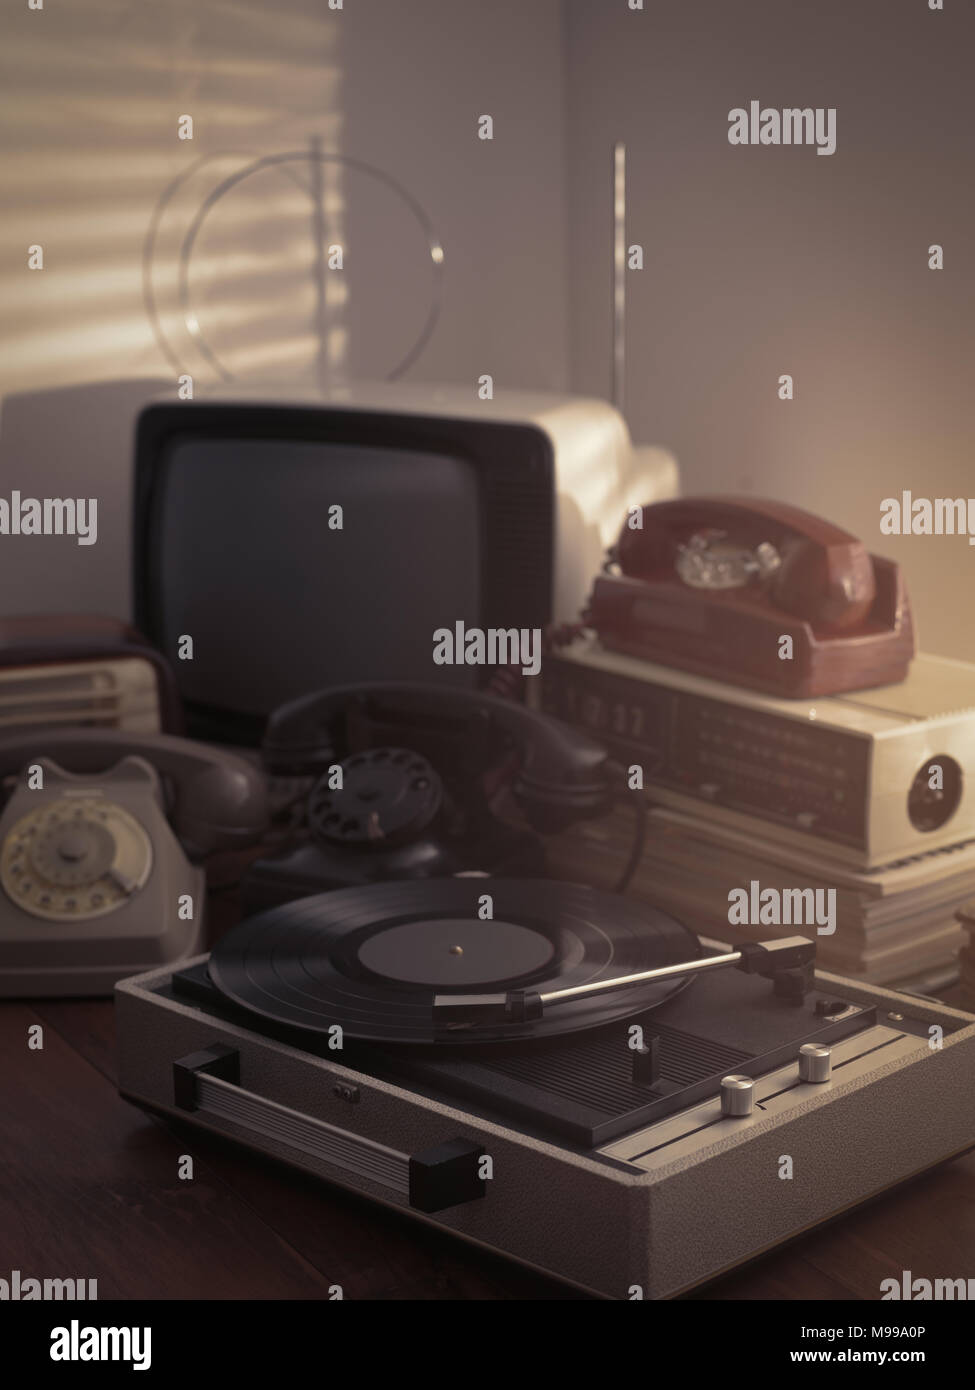 vintage retro revival objects and appliances assortment on a table turntable record player on the foreground M99A0P